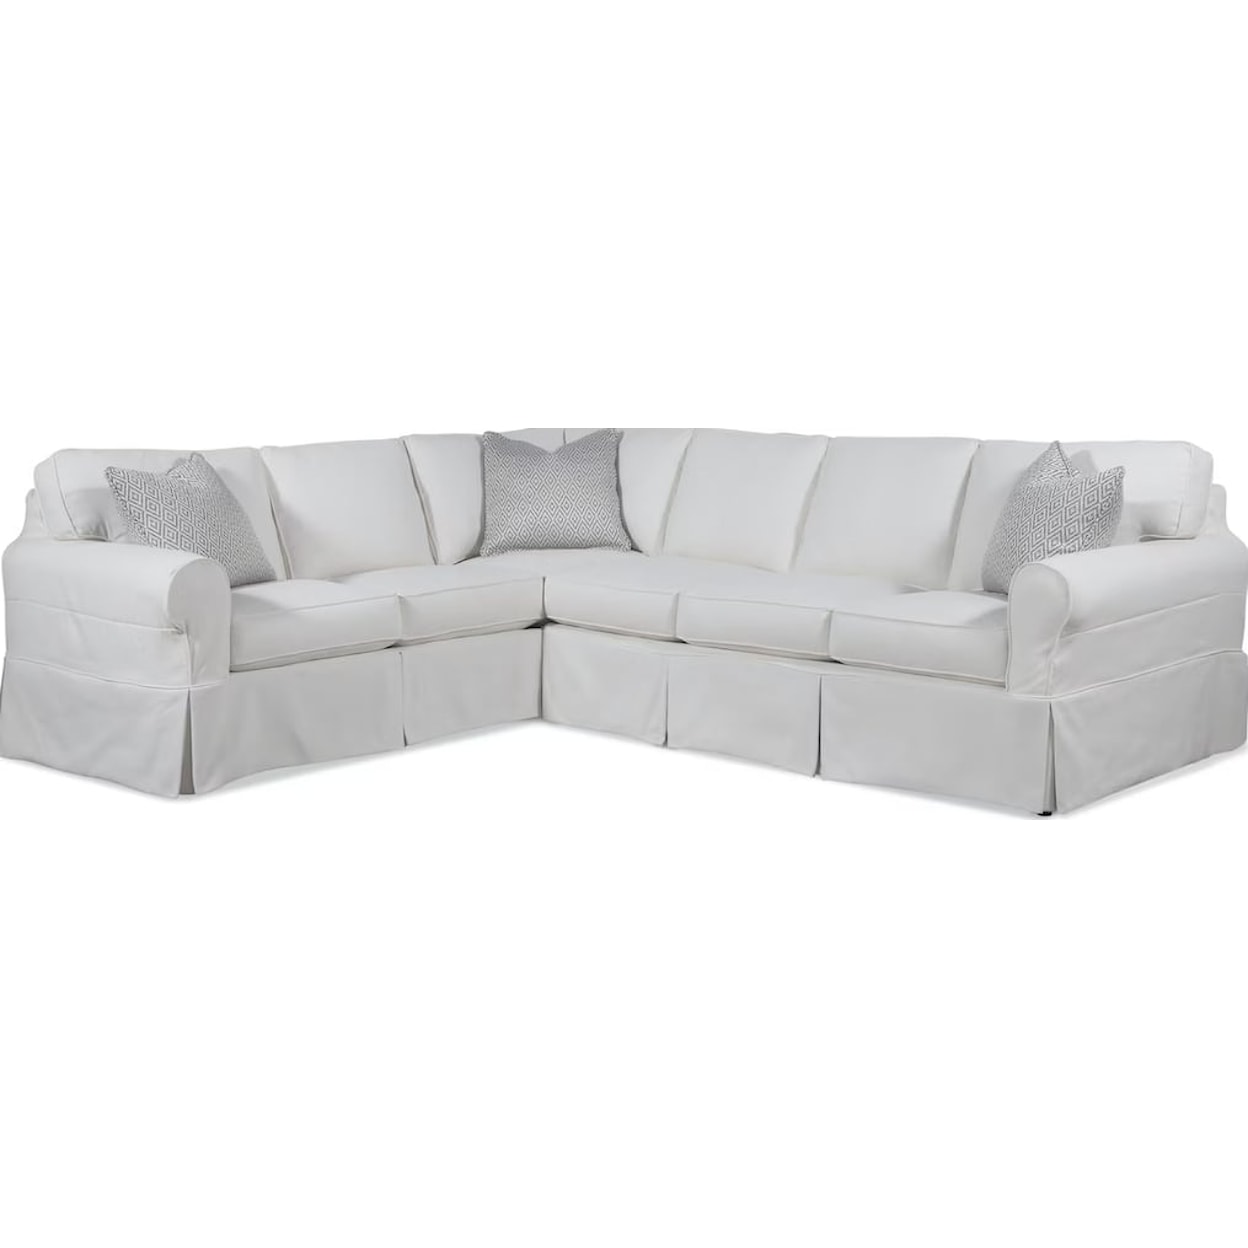 Braxton Culler Bedford Two-Piece Corner Sectional